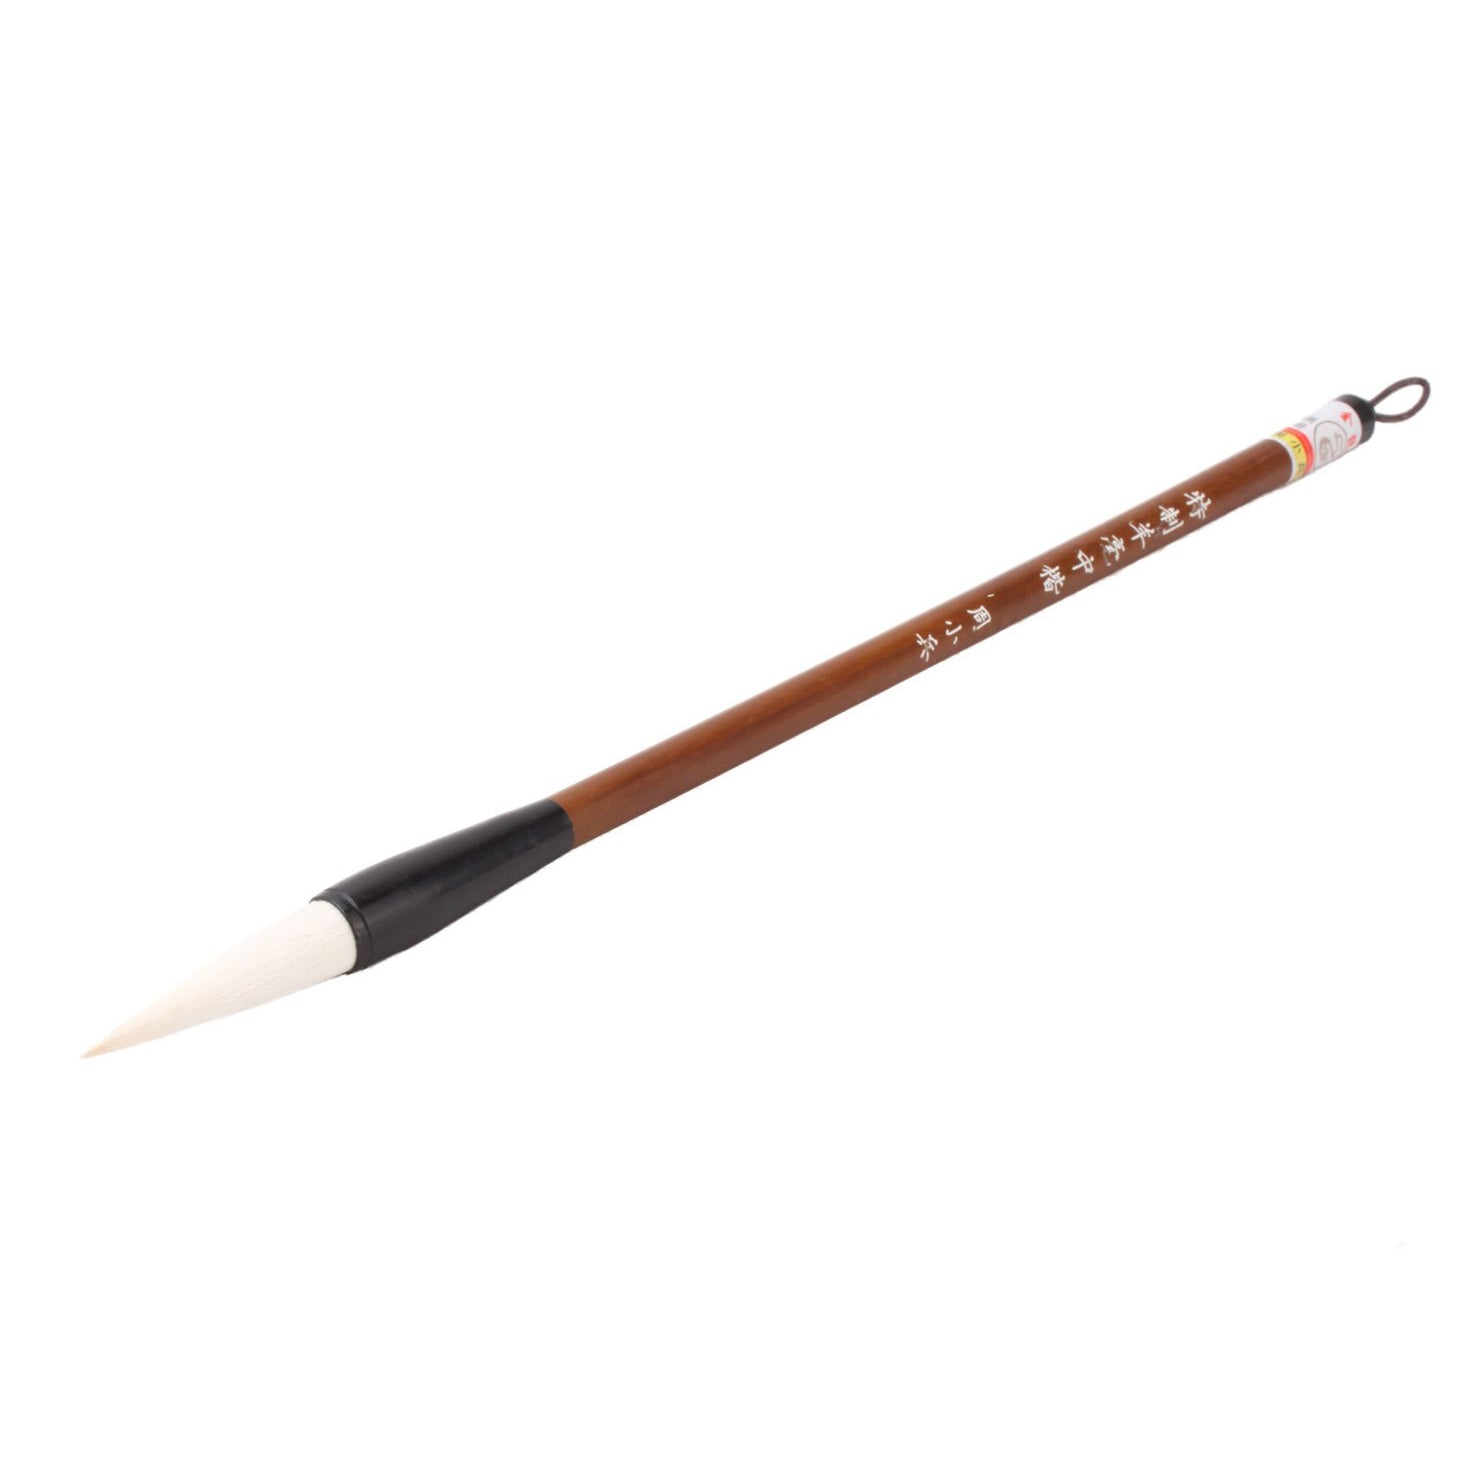 An excellent brush made of Goat Hair with a Medium Tip for Calligraphy Writing, Sumi-e and Fineline Painting